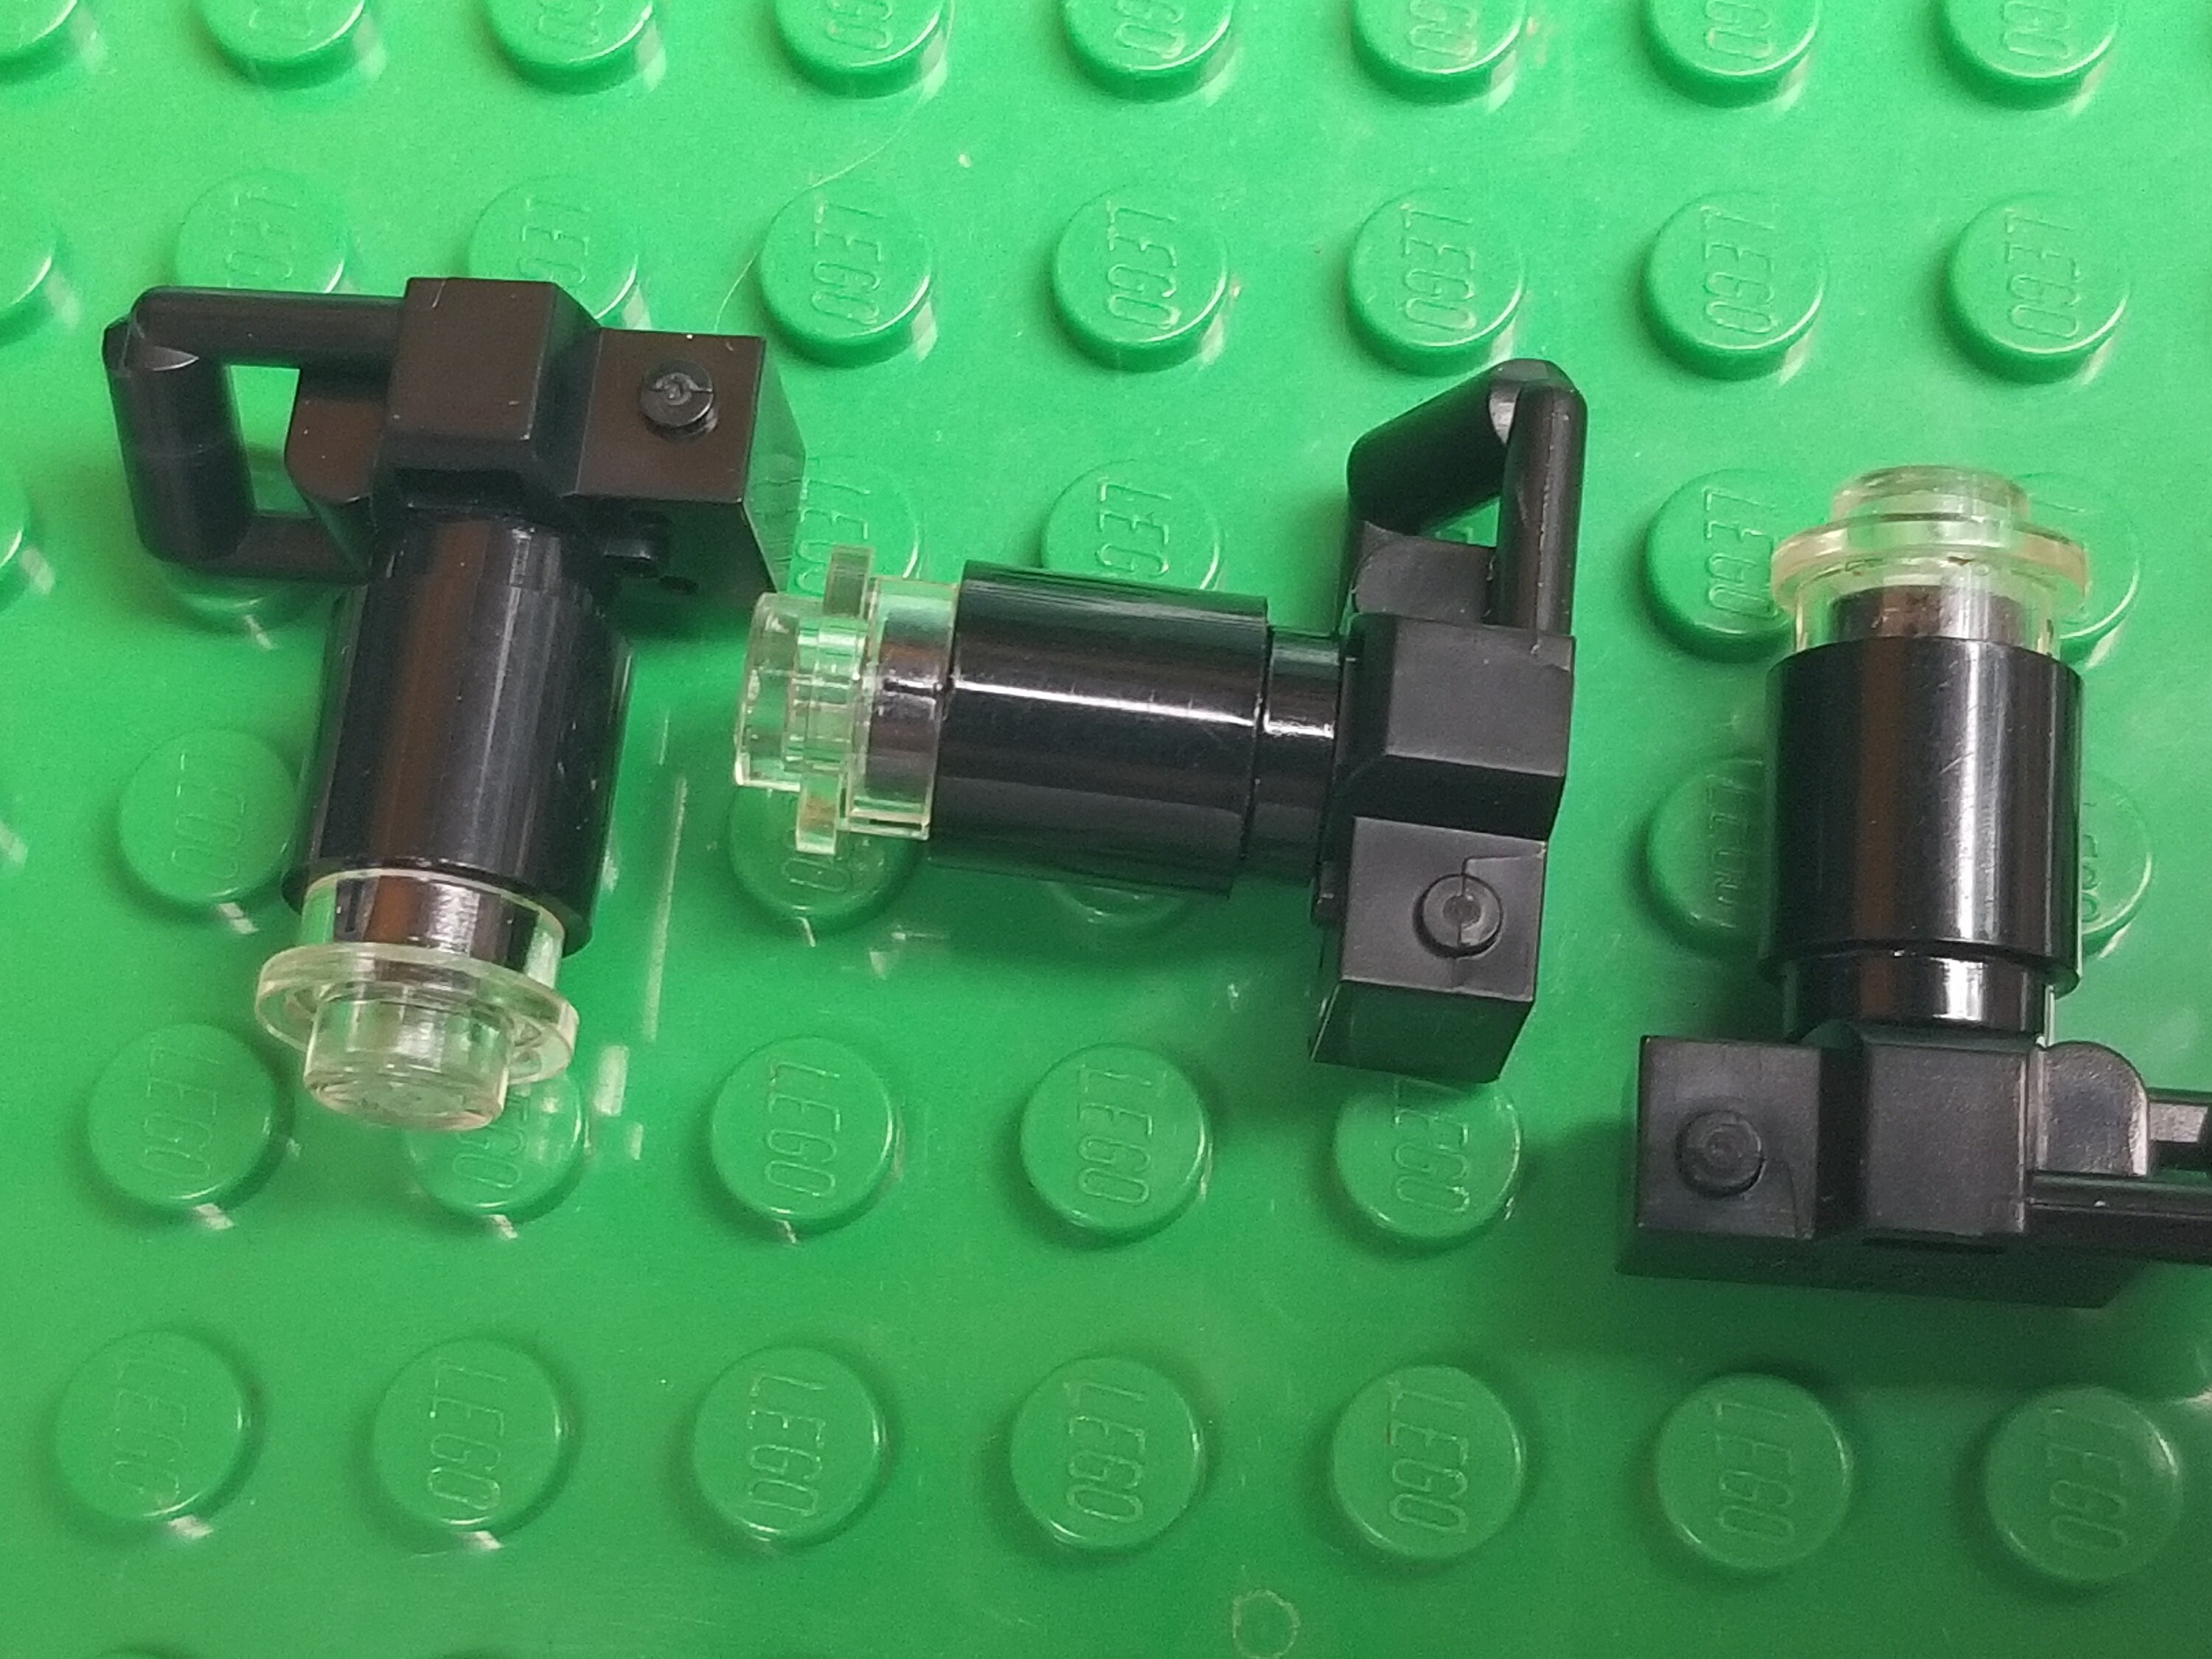 LEGO® camera parts accessories for your minifigure